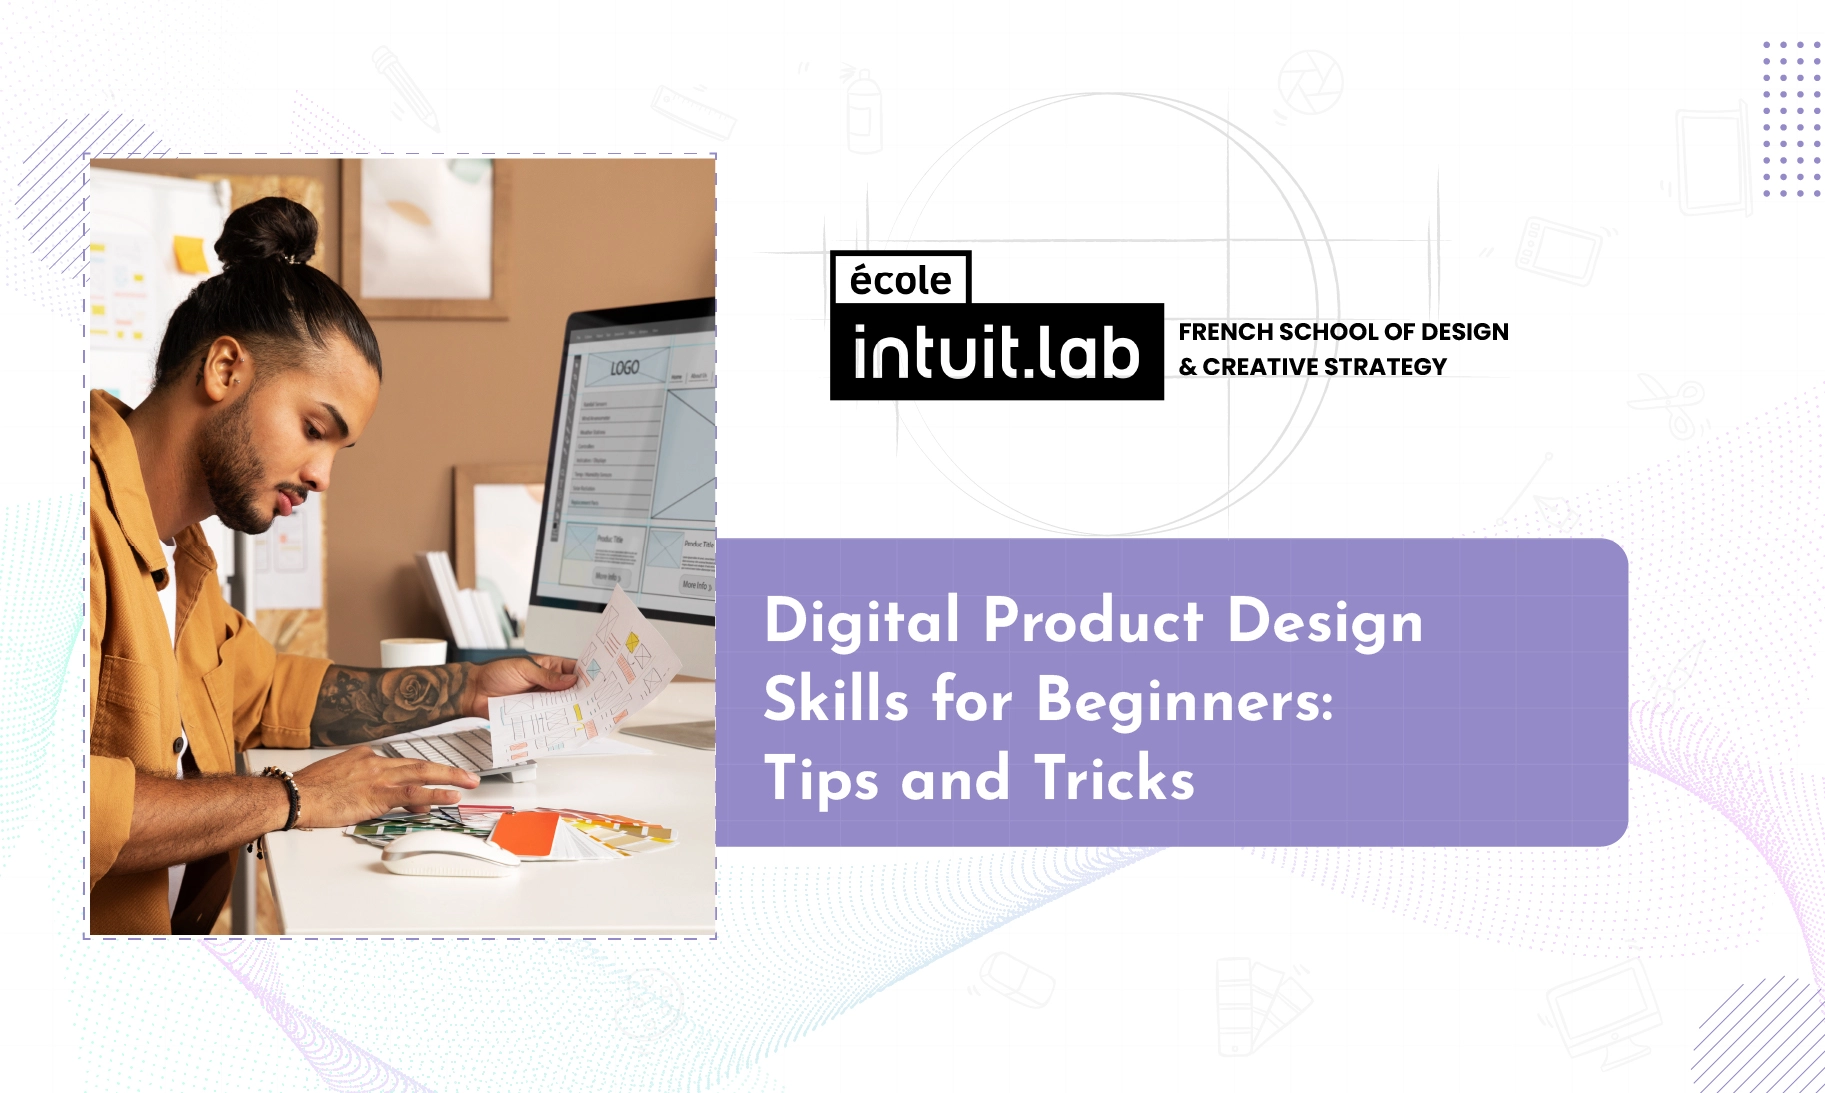 Digital Product Design Skills for Beginners: Tips and Tricks